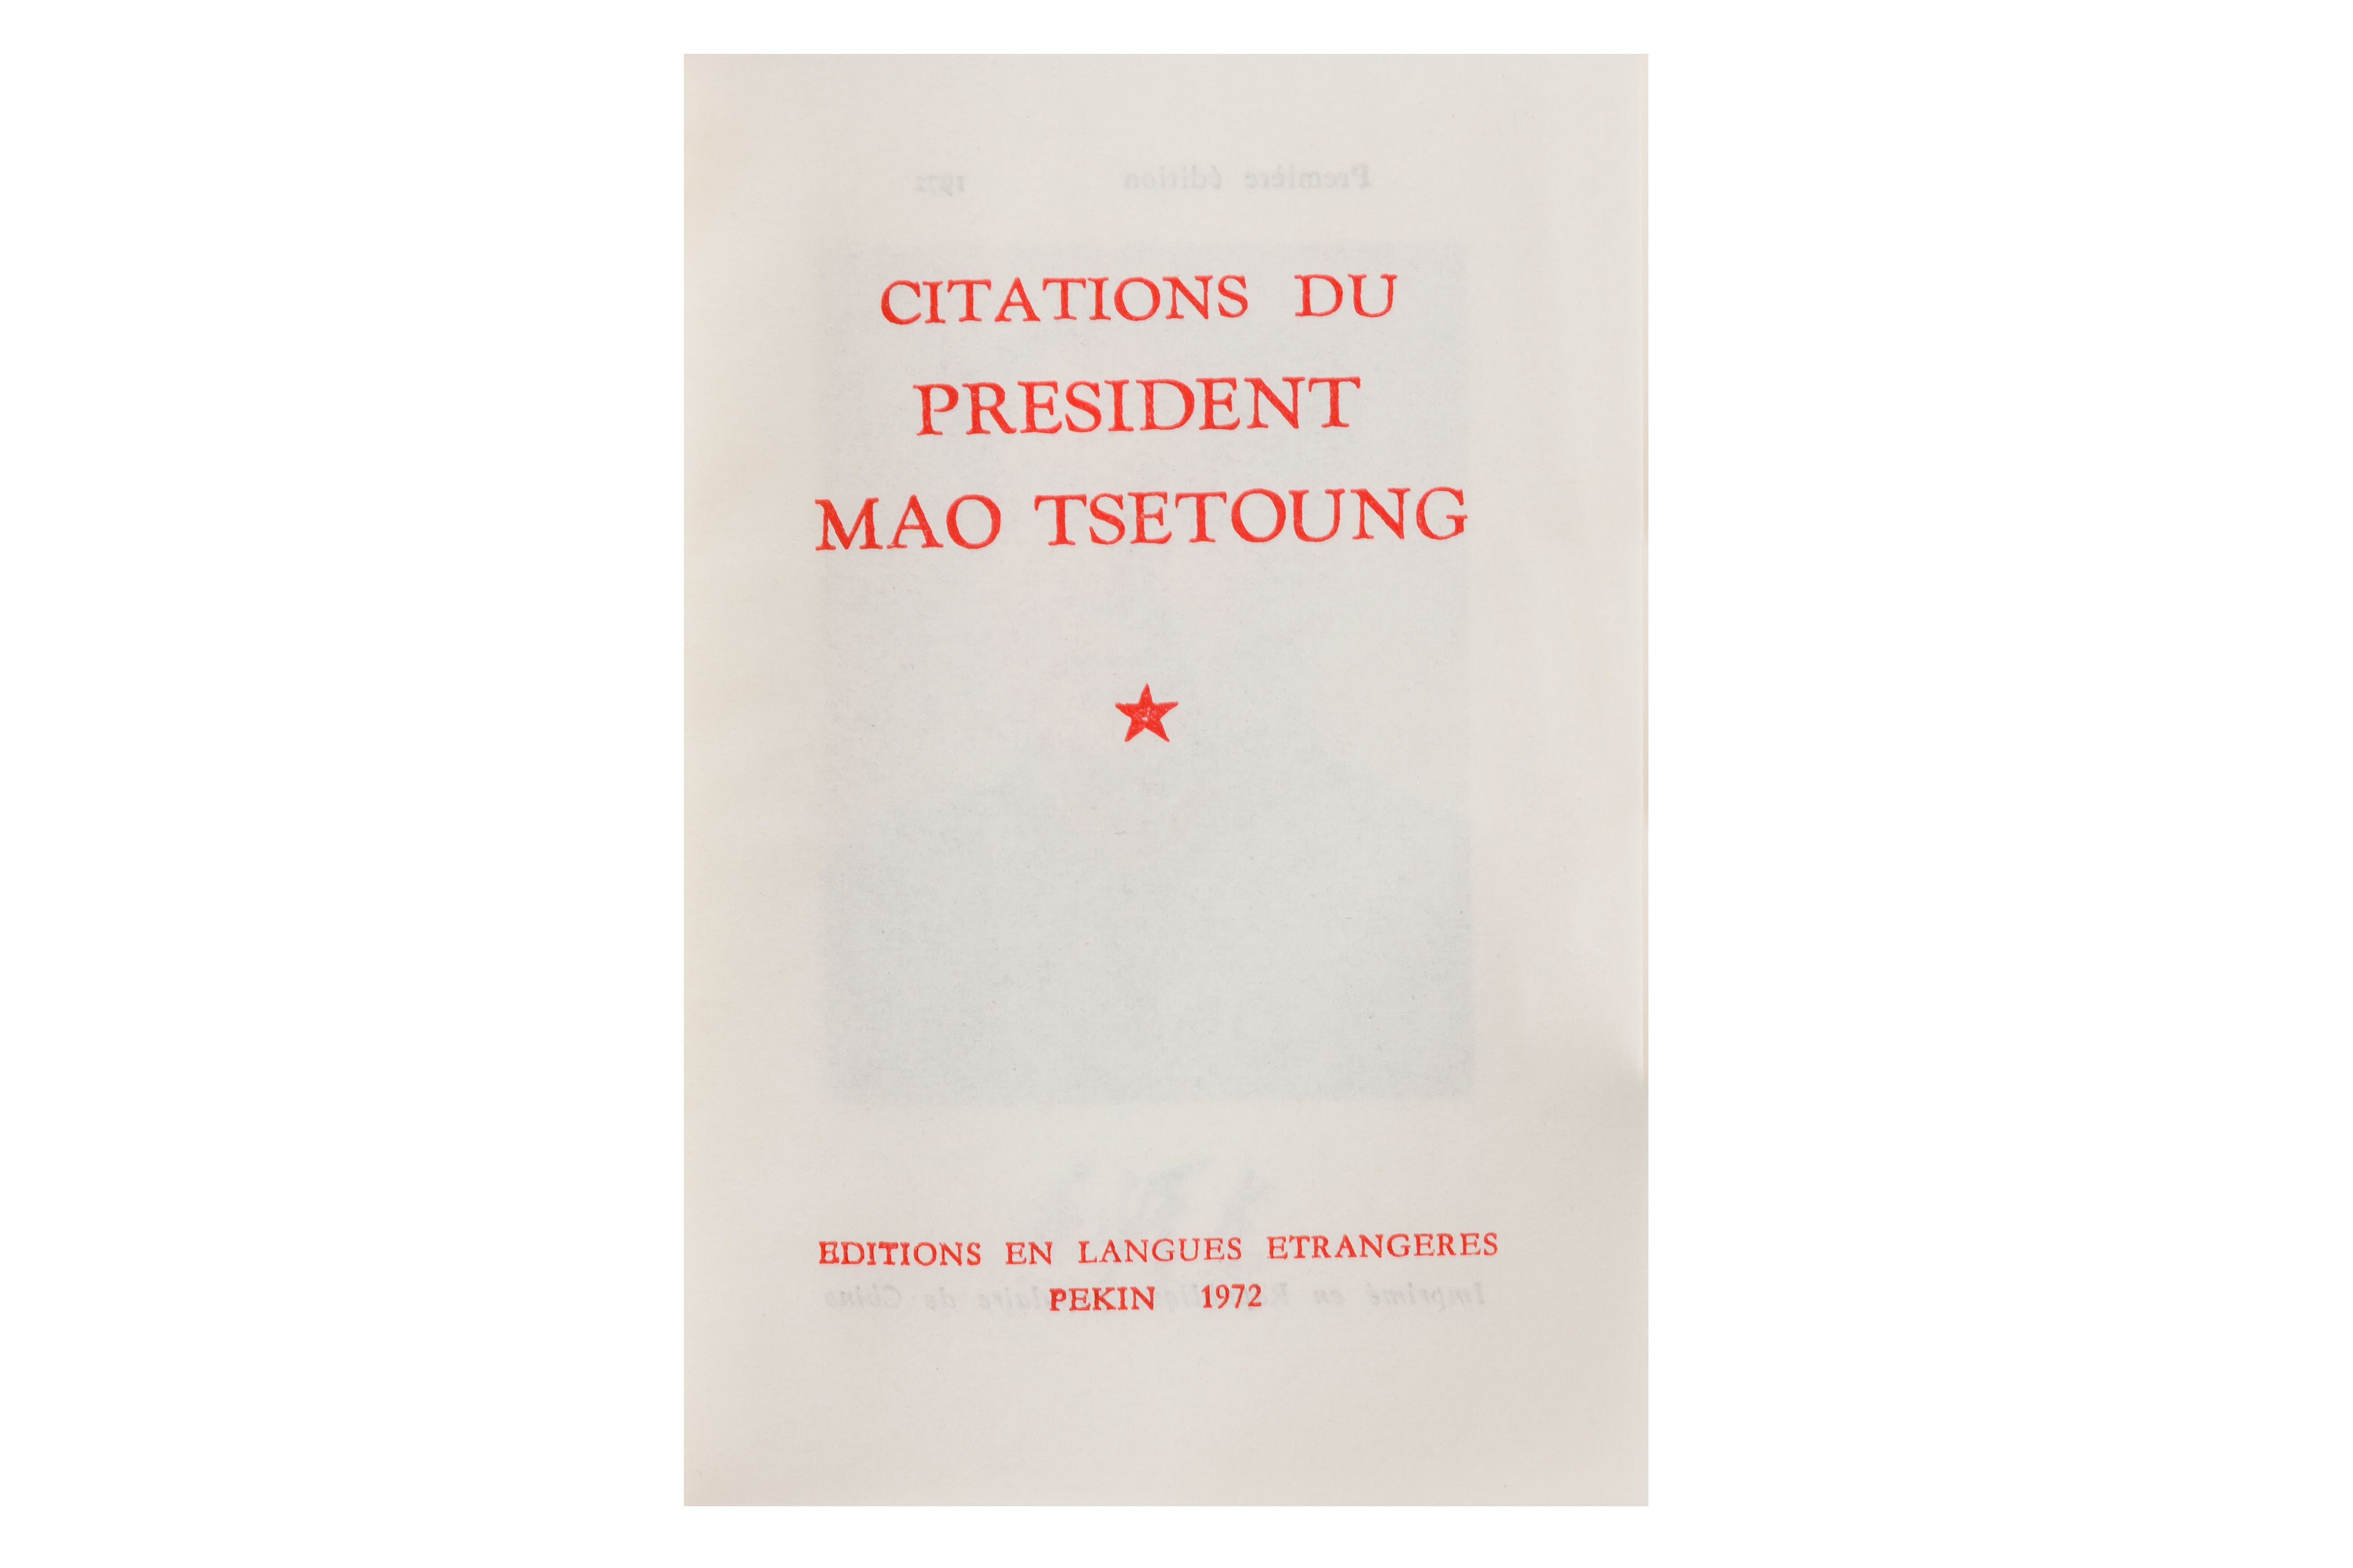 Mao Tse-Tung: Quotations From Chairman Mao Tse-Tung [Little Red Book] - Image 5 of 13